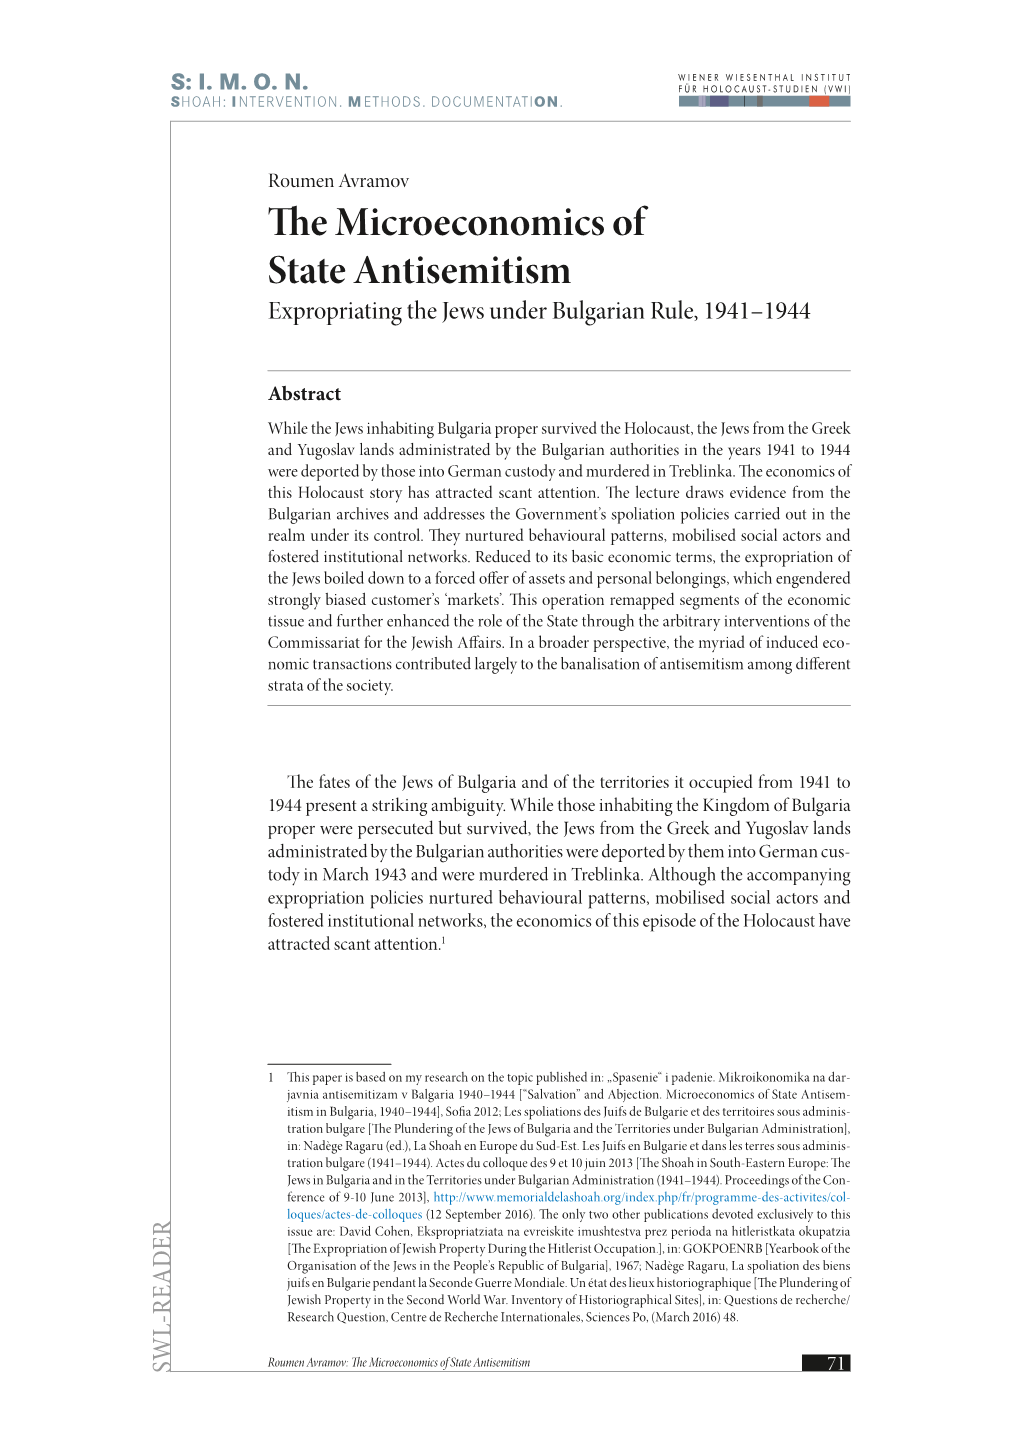 The Microeconomics of State Antisemitism Expropriating the Jews Under Bulgarian Rule, 1941–1944